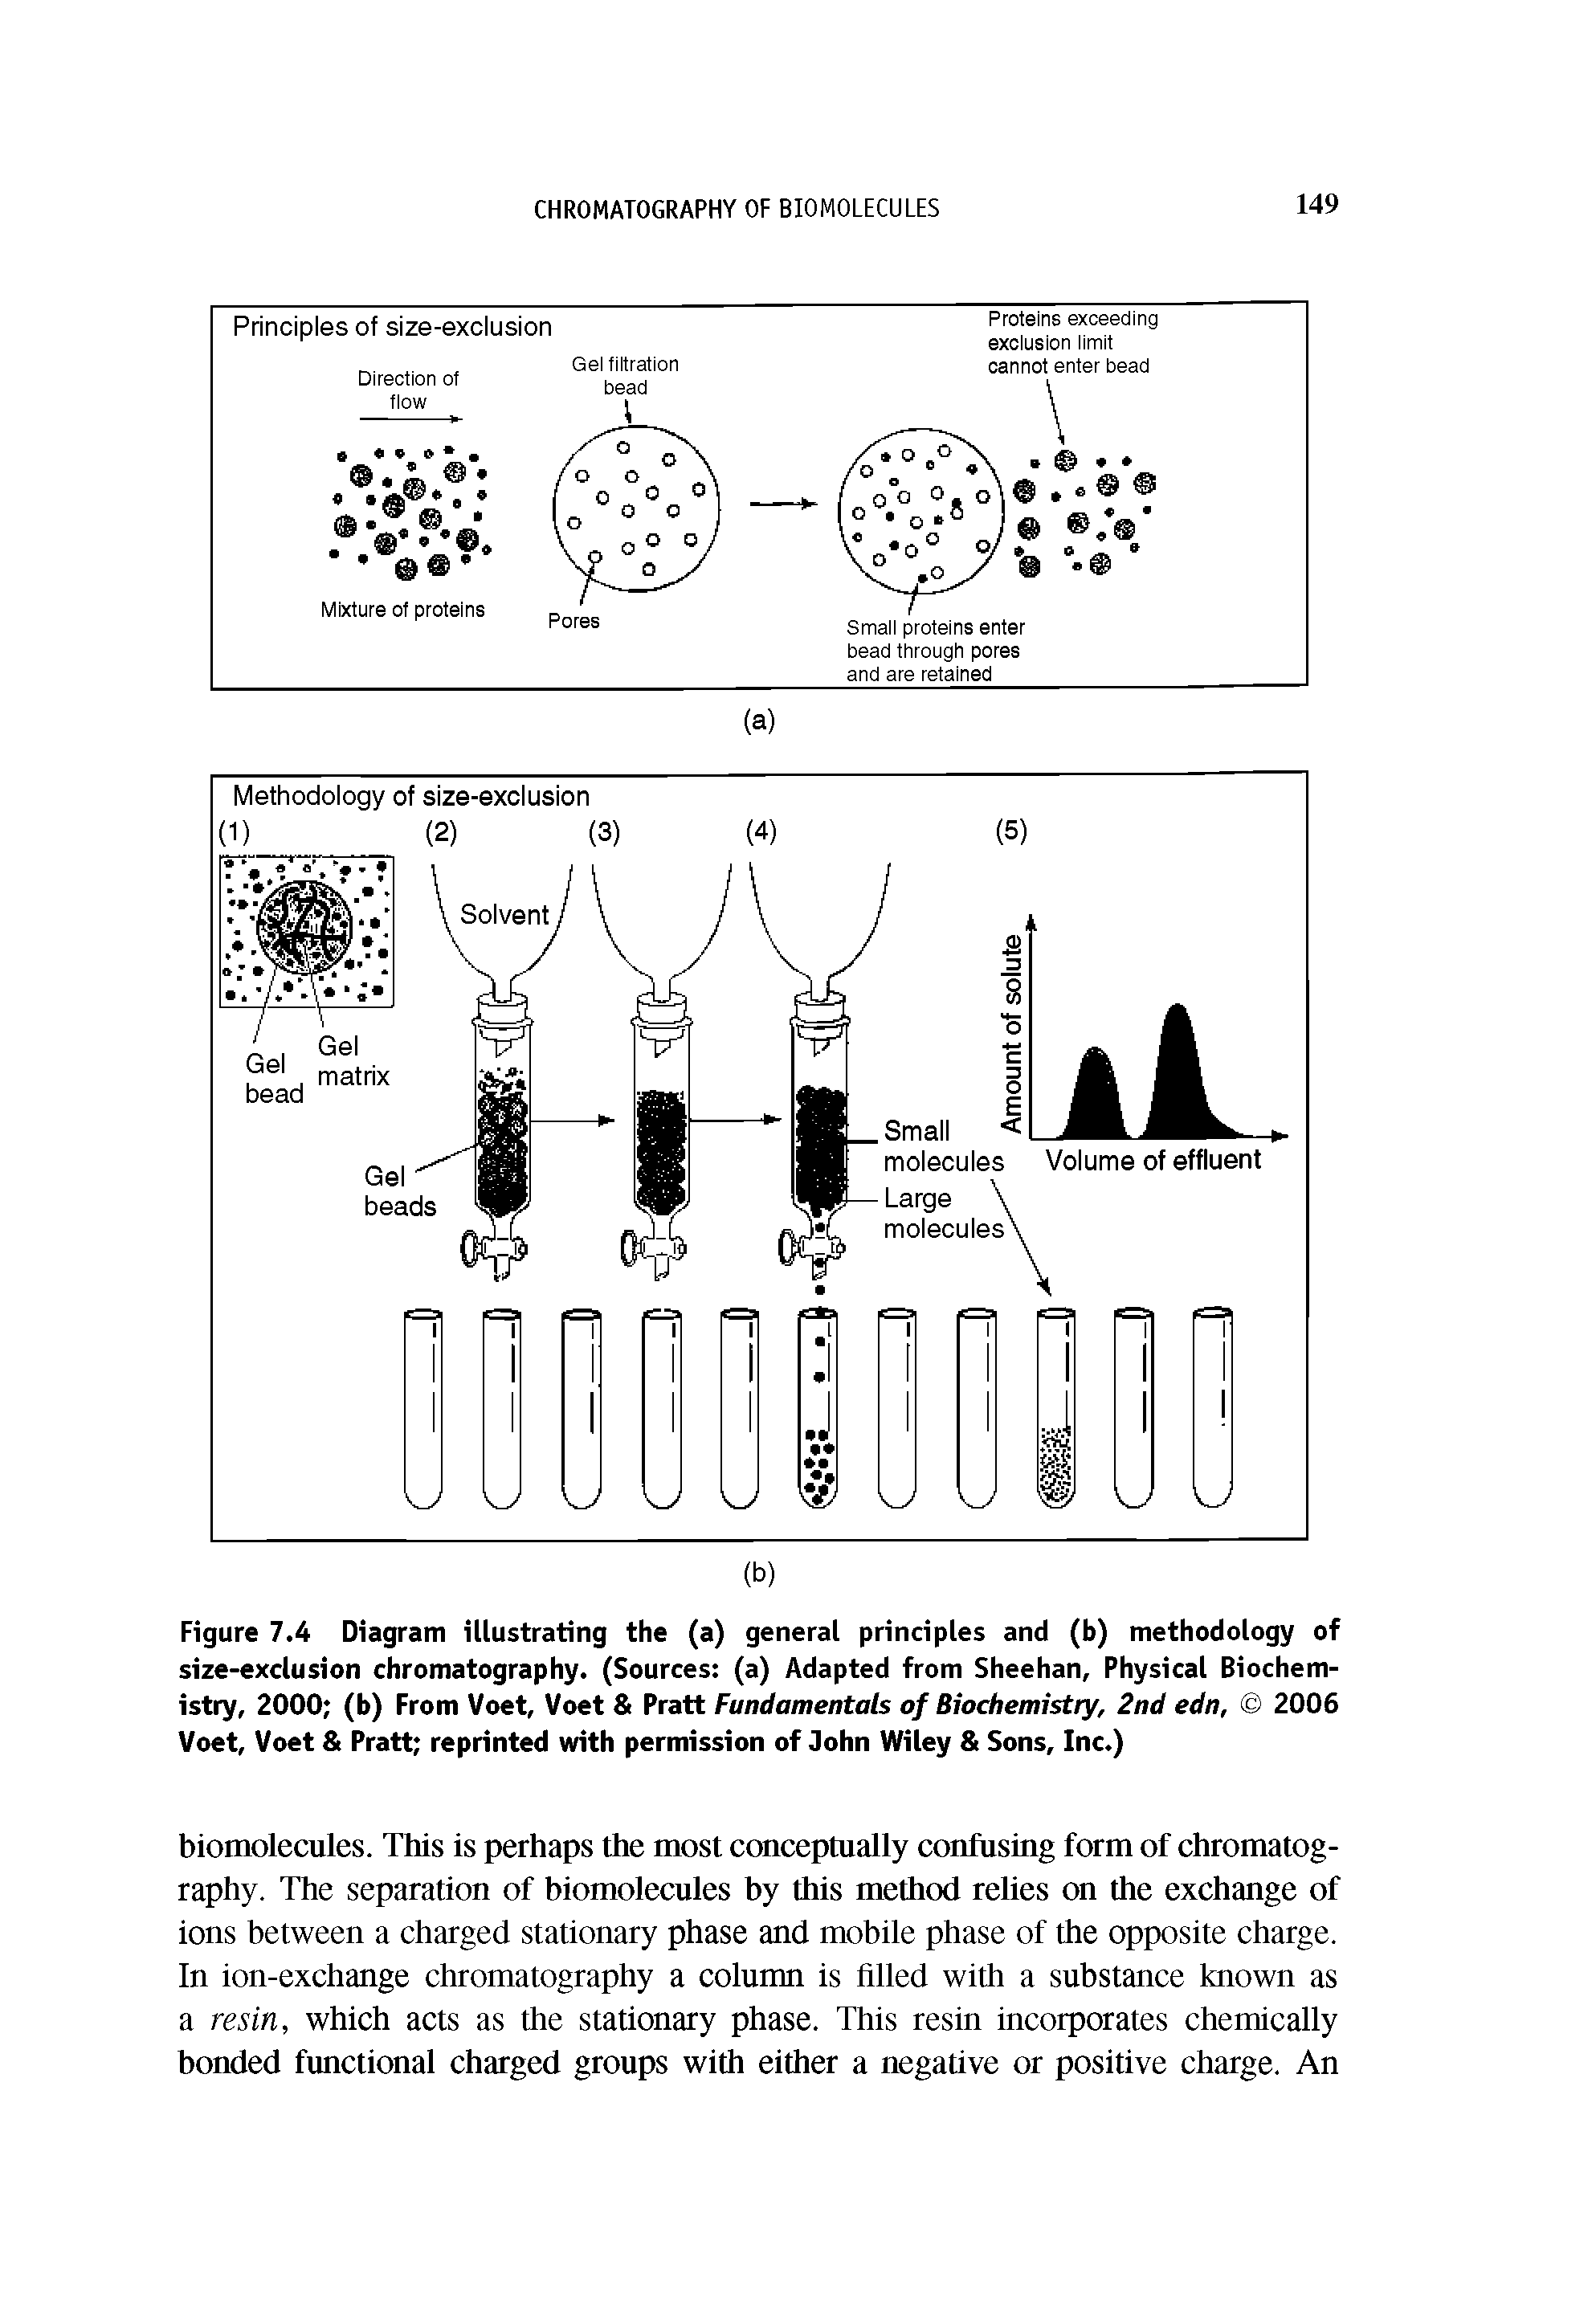 Figure 7.4 Diagram illustrating the (a) general principles and (b) methodology of size-exclusion chromatography. (Sources (a) Adapted from Sheehan, Physical Biochemistry, 2000 (b) From Voet, Voet Pratt Fundamentals of Biochemistry, 2nd edn, 2006 Voet, Voet Pratt reprinted with permission of John Wiley Sons, Inc.)...